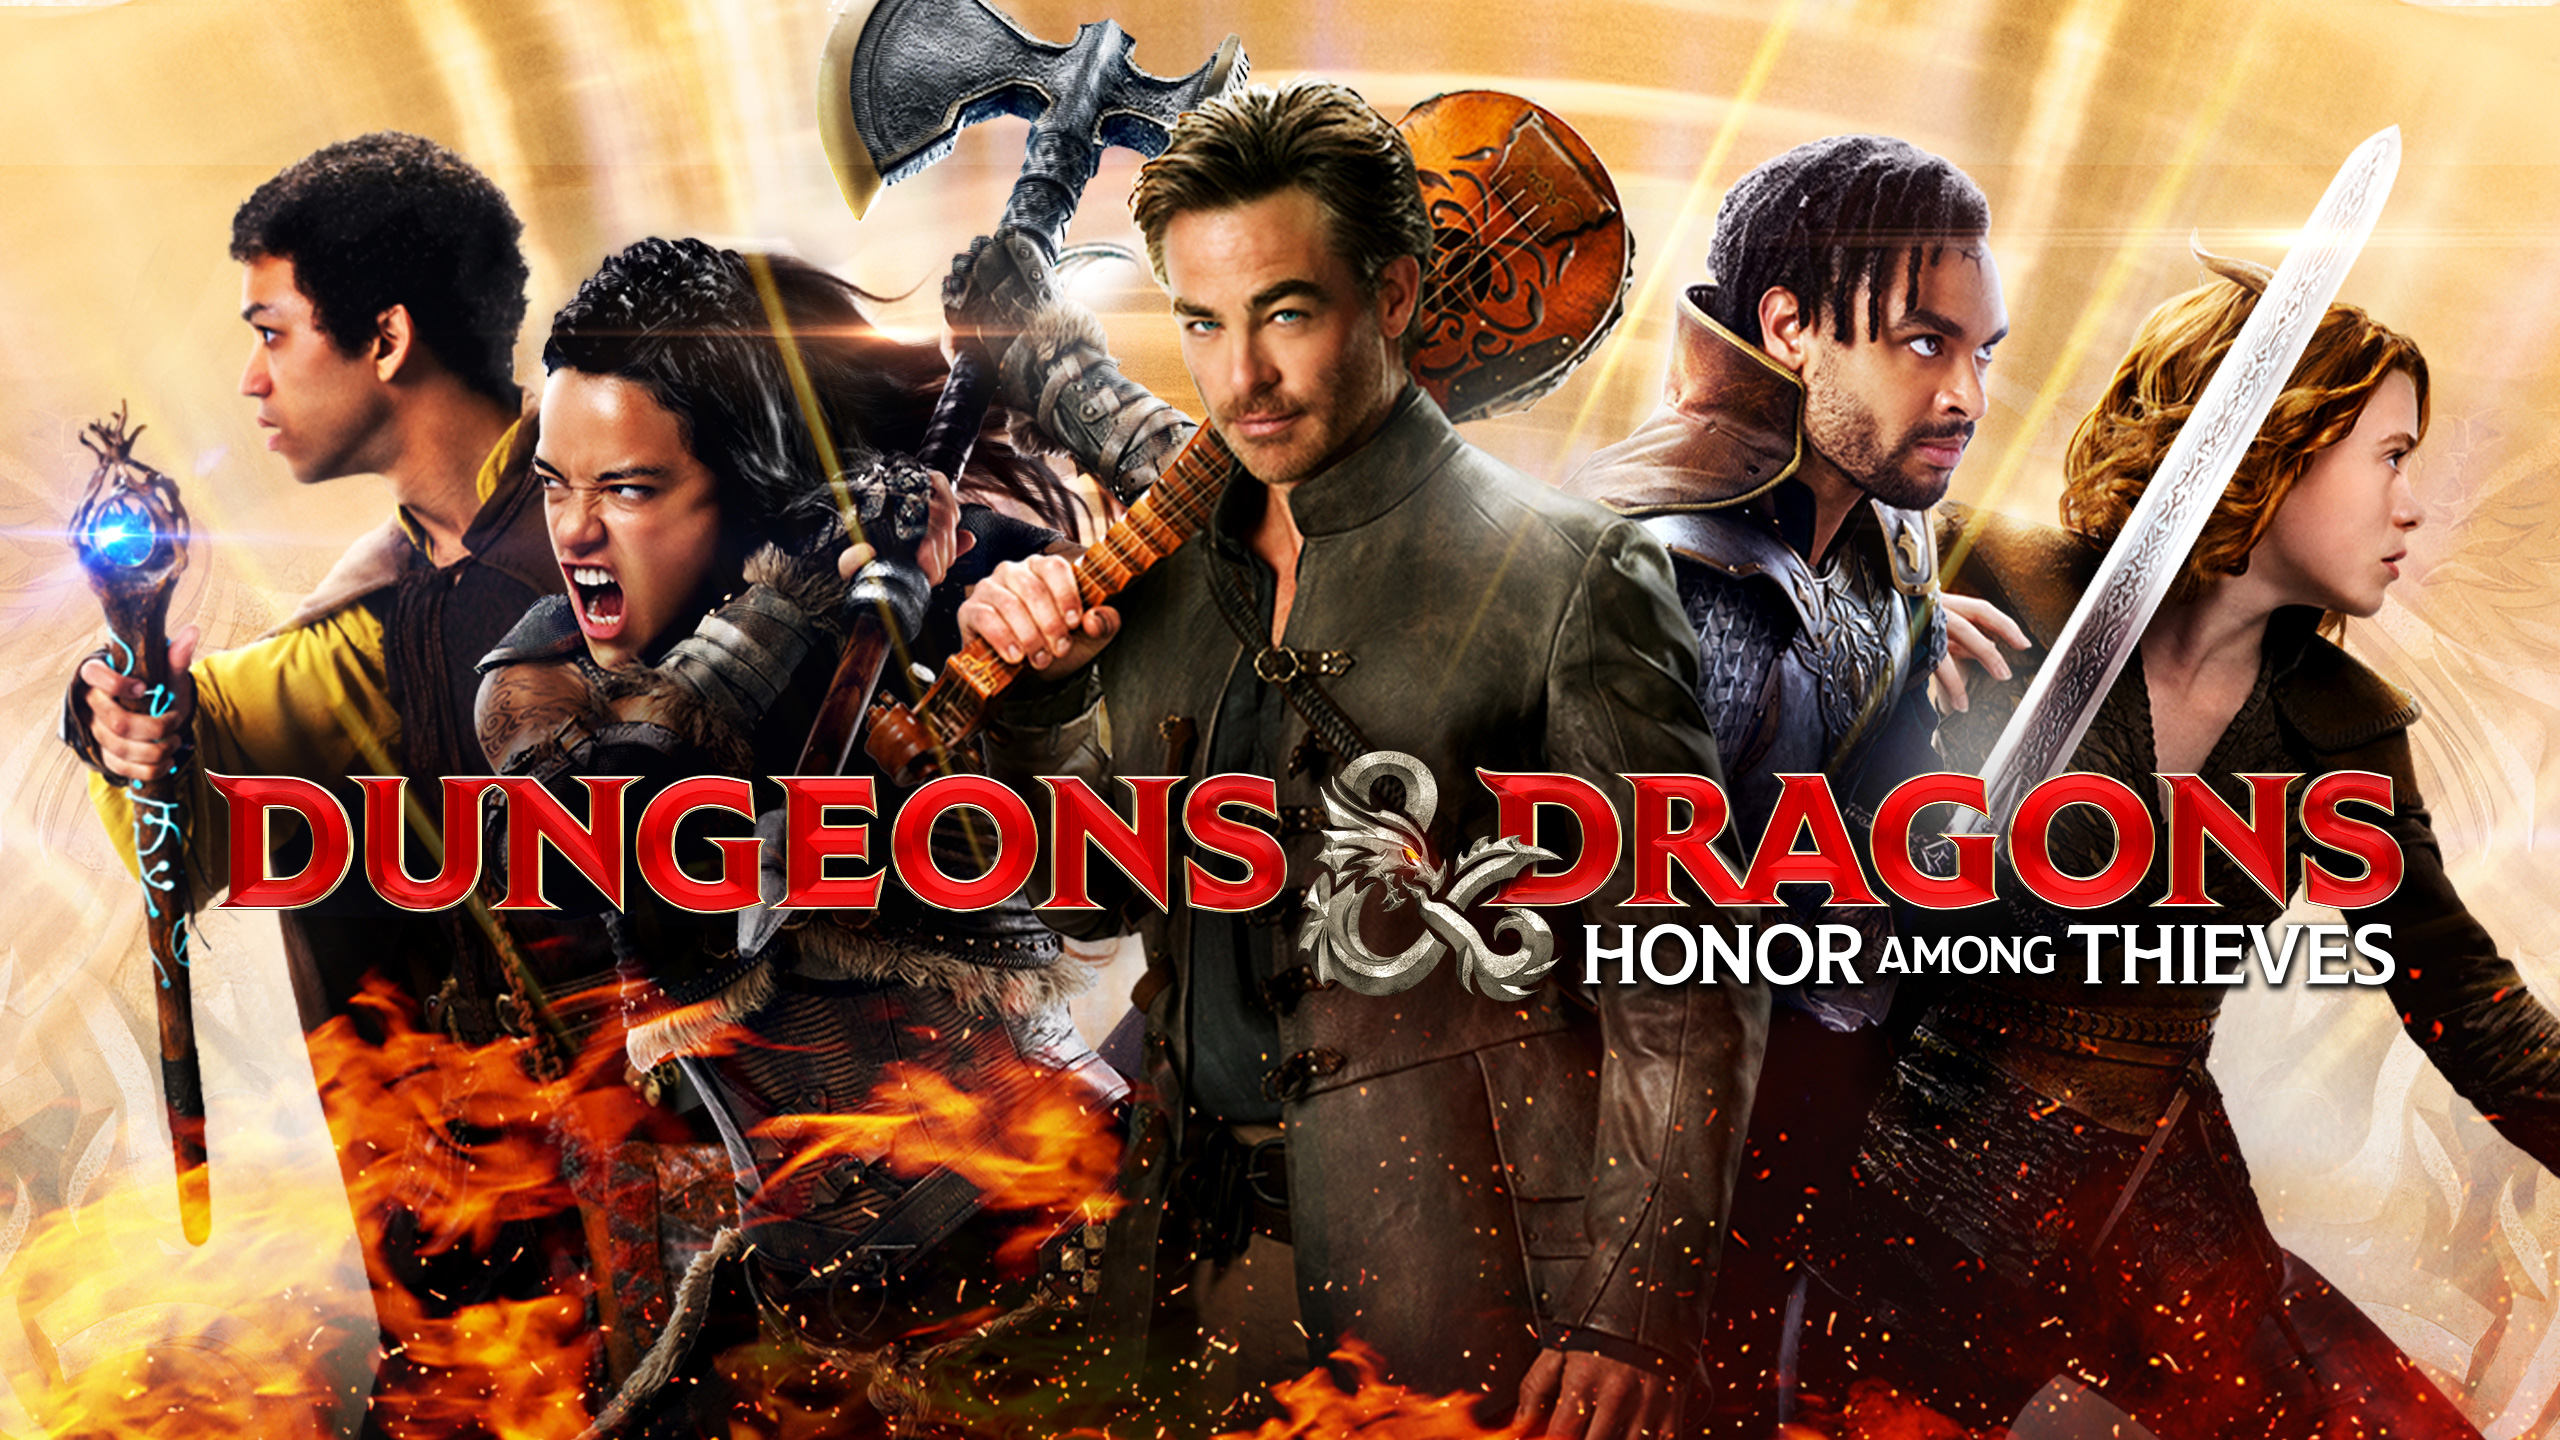 "Dungeons & Dragons: Honor Among Thieves"